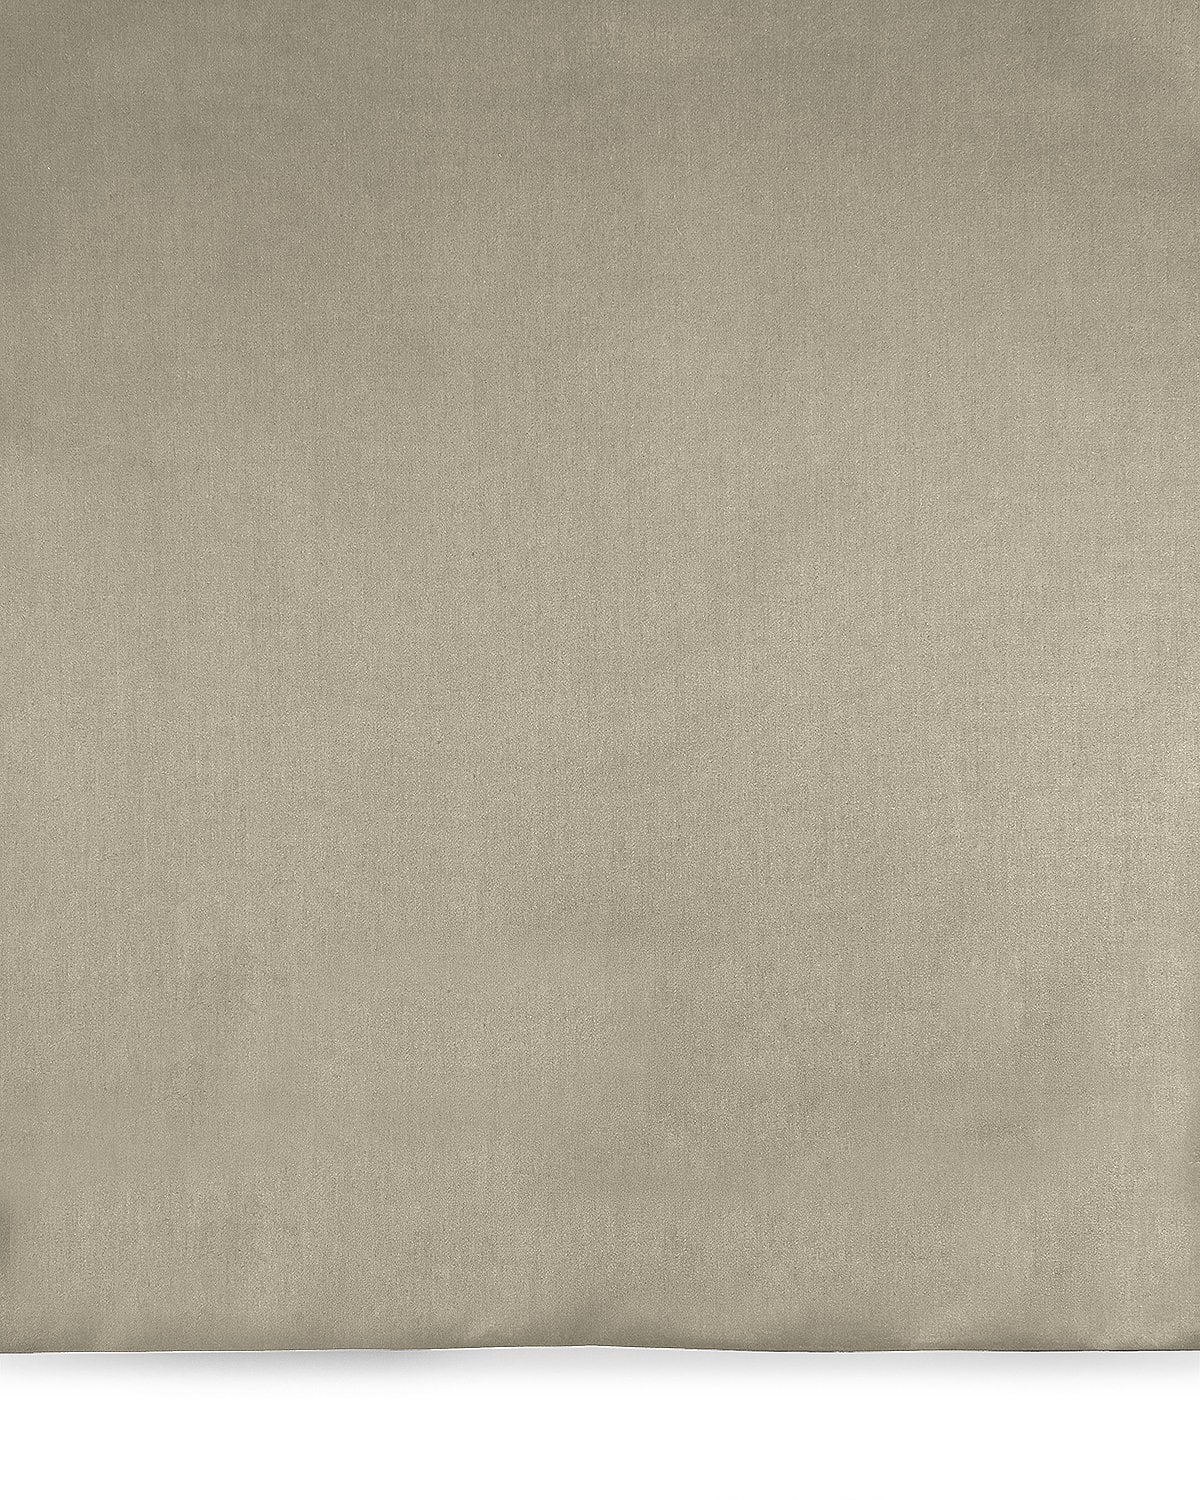 Image Ralph Lauren Home California King 624 Thread Count Fitted Sheet